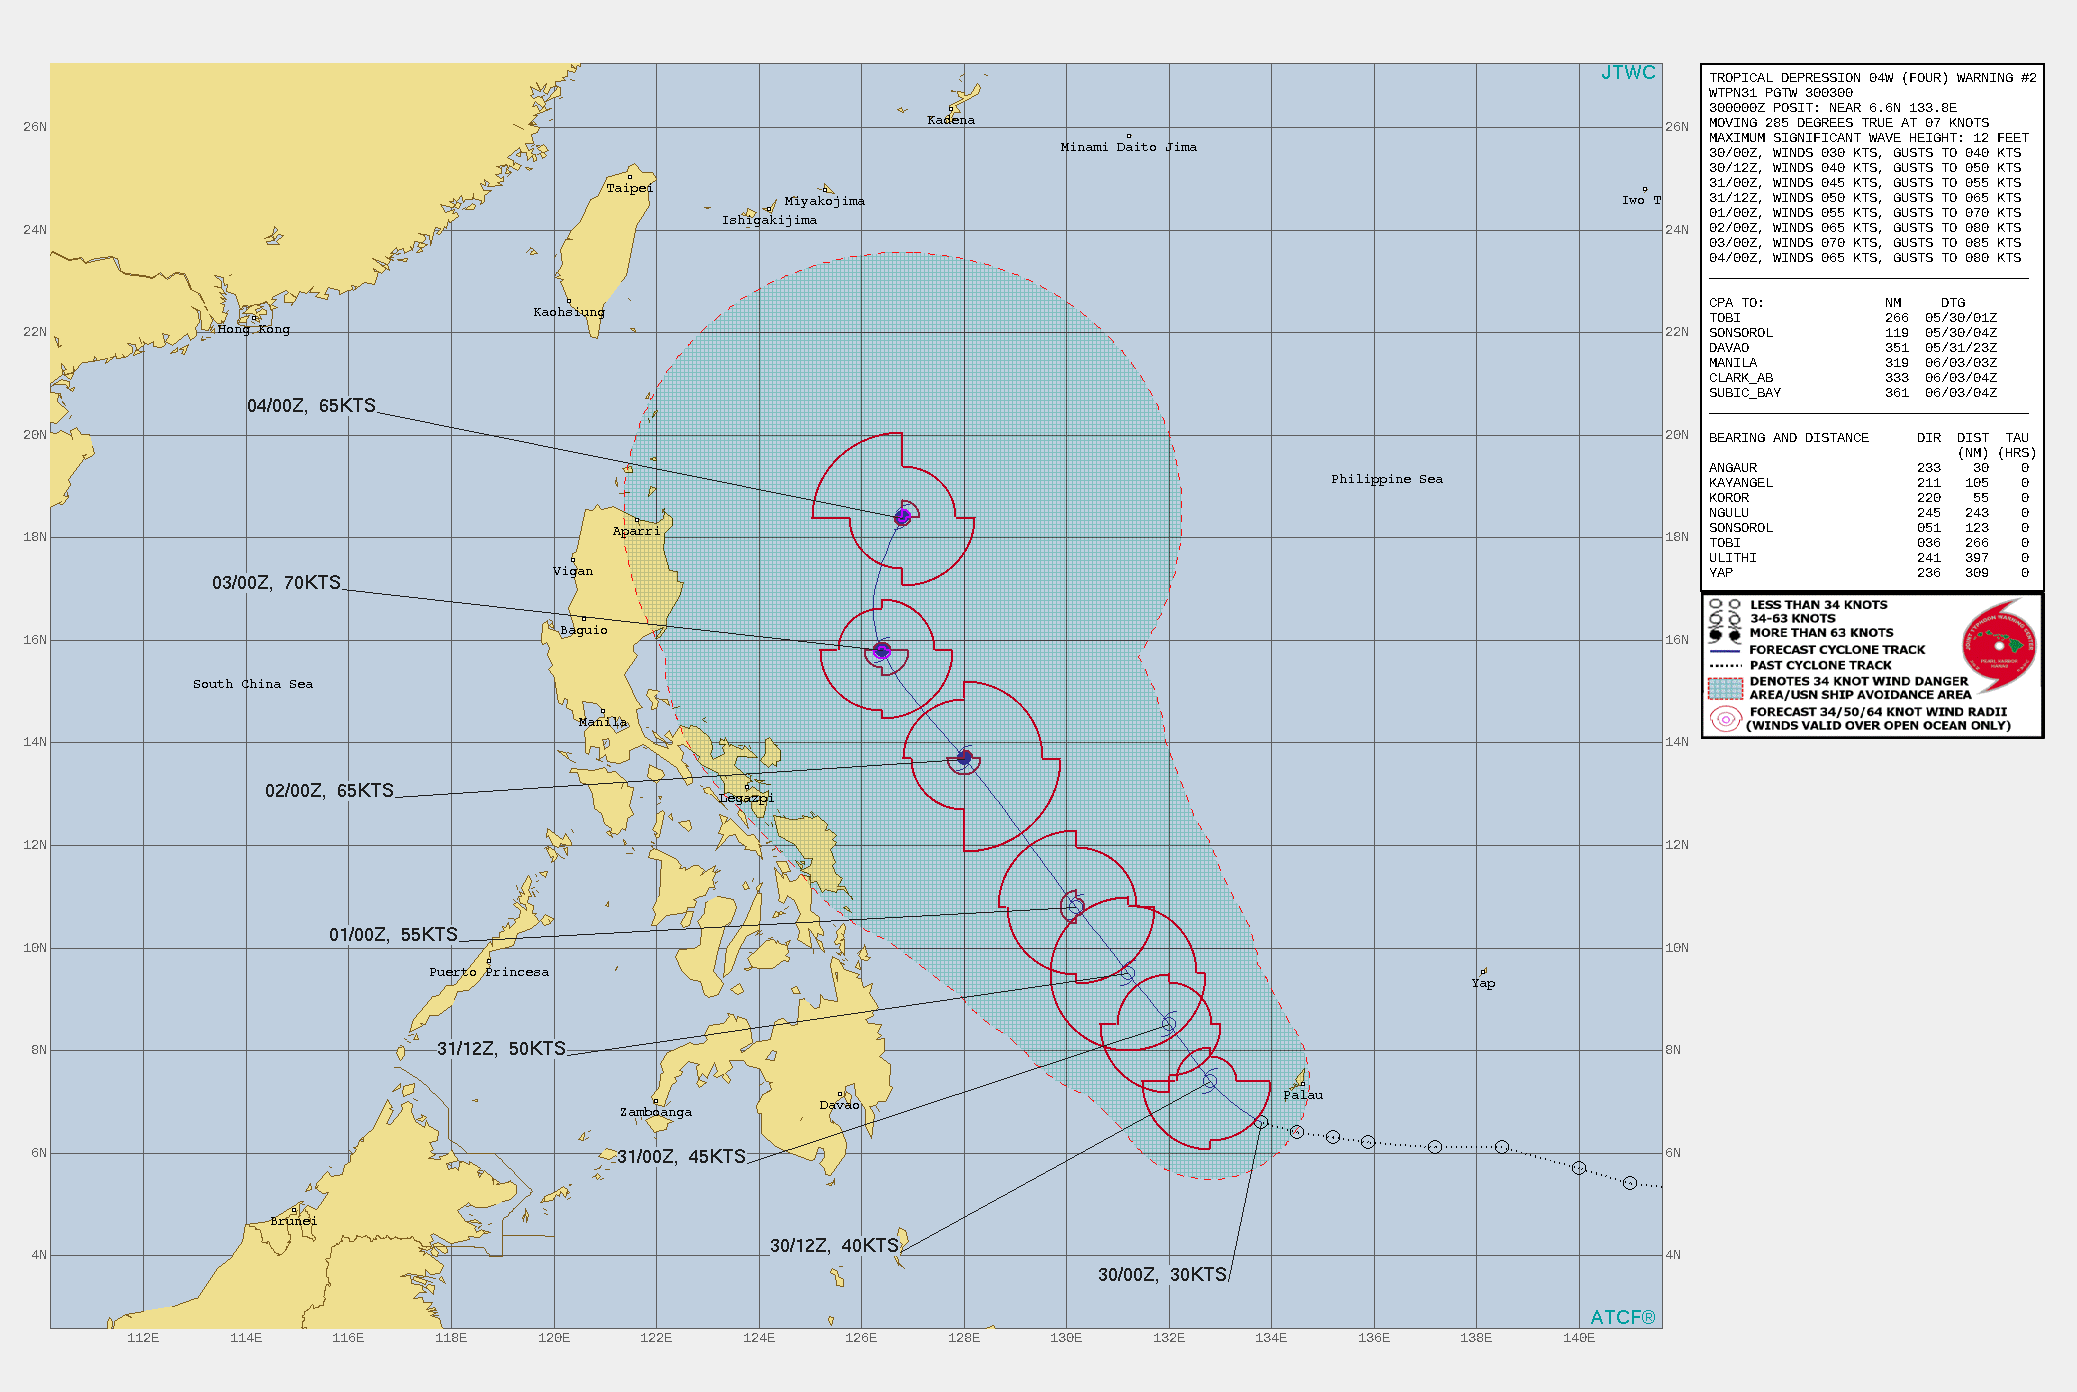 TD 04W. WARNING 2 ISSUED AT 30/03UTC.TD 04W REMAINS IN A FAVORABLE ENVIRONMENT WITH GOOD EASTWARD AND EQUATORWARD OUTFLOW, LOW WIND SHEAR (VWS) ALOFT, AND VERY WARM SEA  SURFACE TEMPERATURES (SST) IN THE PHILIPPINE SEA. THE CYCLONE IS  TRACKING ALONG THE SOUTHWEST PERIPHERY OF THE SUBTROPICAL RIDGE  (STR) TO THE EAST-NORTHEAST. TD 04W WILL TRACK MORE NORTHWESTWARD OVER THE NEXT 72 HOURS  UNDER THE STEERING INFLUENCE OF THE SUBTROPICAL RIDGE(STR). THE SYSTEM IS FORECAST TO  STEADILY INTENSIFY UNDER THE AFOREMENTIONED FAVORABLE CONDITIONS,  AND BY 72H, WILL REACH TYPHOON INTENSITY OF 65KNOTS/US CAT 1.  AFTER 72H, TD 04W WILL CONTINUE ON ITS NORTHWESTWARD TRACK  UNDER THE SAME STR; HOWEVER, BY 96H, THE SYSTEM WILL BEGIN TO  ROUND THE RIDGE AXIS THEN ACCELERATE NORTHEASTWARD. THE FAVORABLE  CONDITIONS WILL PERSIST AND INTENSIFY THE CYCLONE TO 75KNOTS/US CAT 1 BY  96H. AFTERWARD, AS IT BECOMES EXPOSED TO INCREASED POLEWARD OUTFLOW  ASSOCIATED WITH THE PREVAILING WESTERLIES UNDER THE POLAR FRONT JET,  THE SYSTEM WILL PEAK AROUND 102H THEN SYSTEM WILL BEGIN TO DECAY  DUE TO INCREASING VWS DOWN TO 65KNOTS BY 120H.